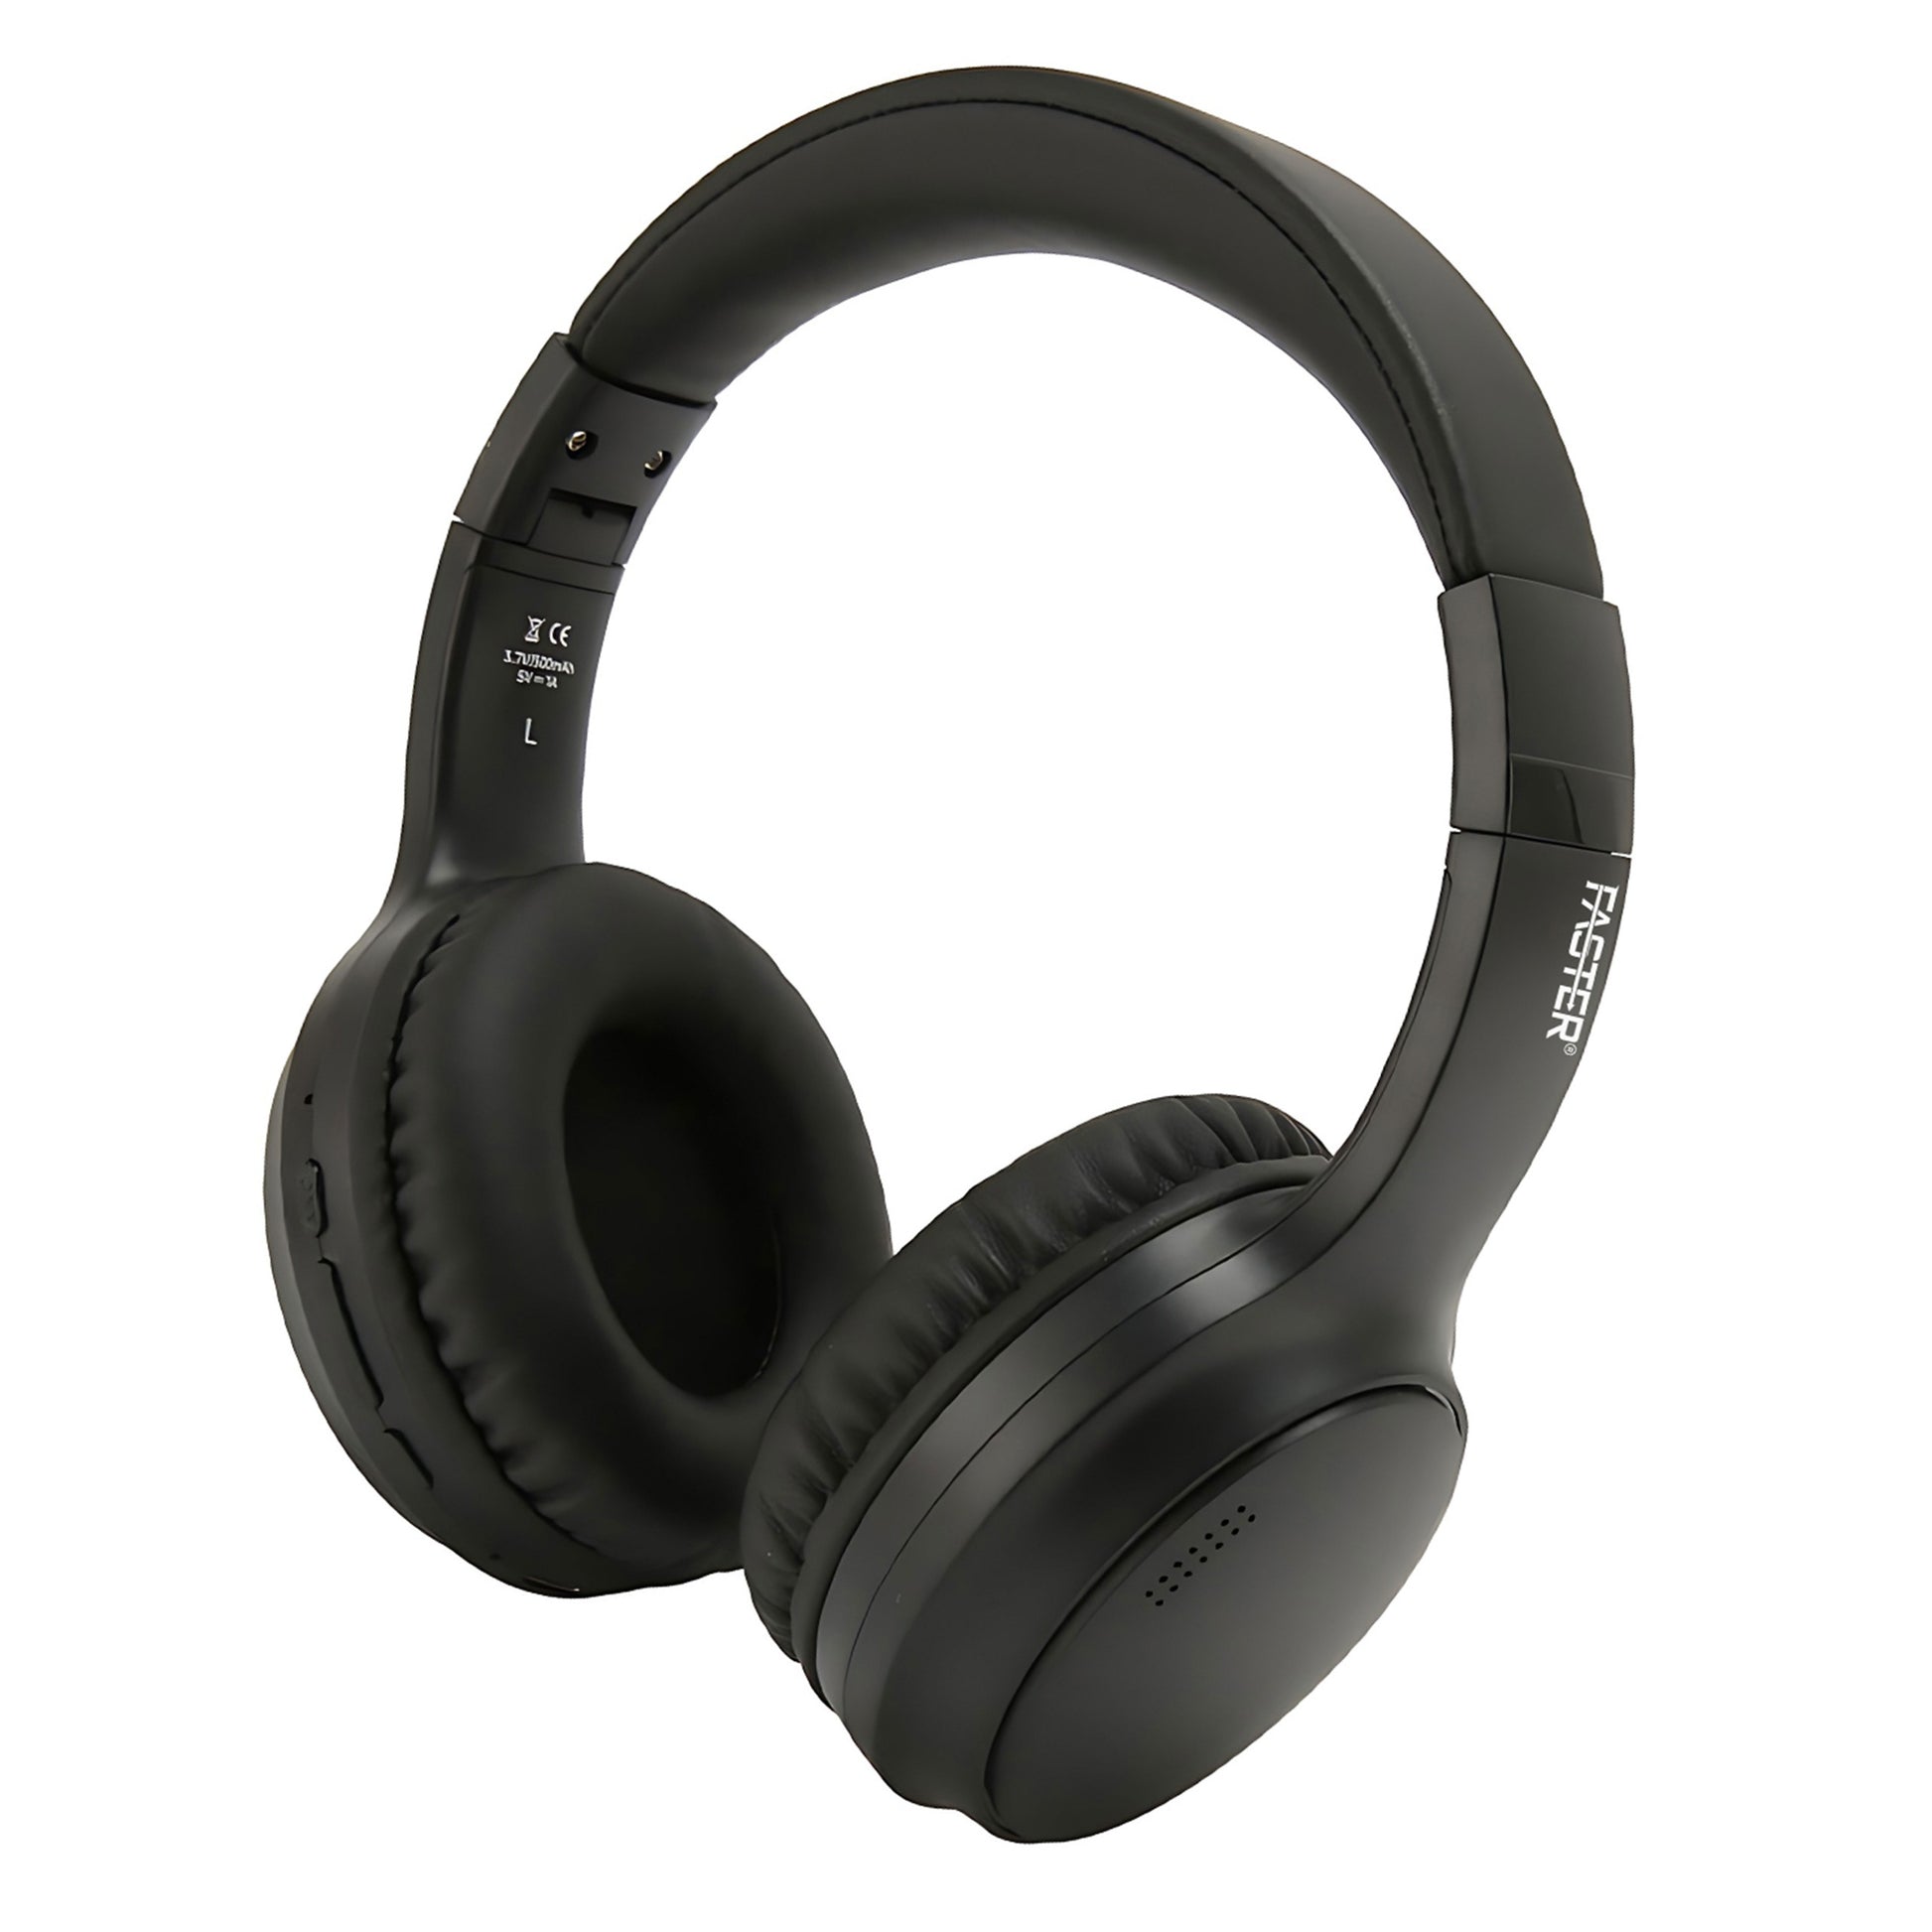 A Side view of Faster black S5 ANC Over-Ear Wireless Headphone with White Background